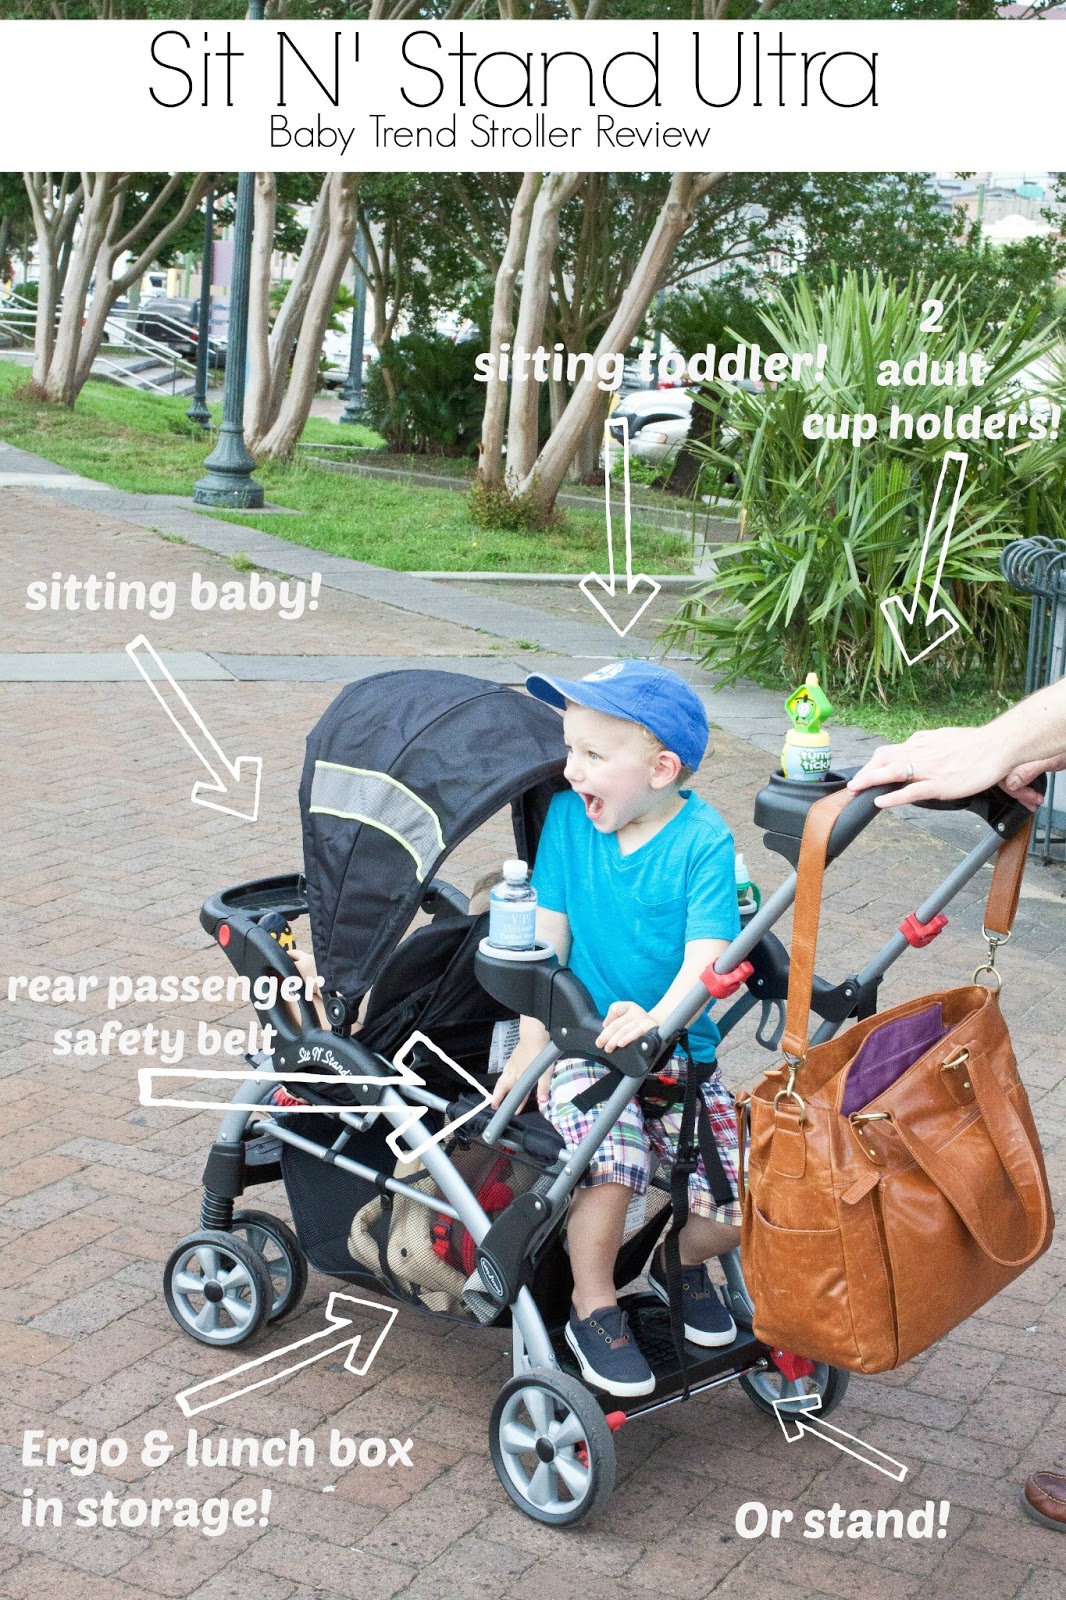 double stand stroller